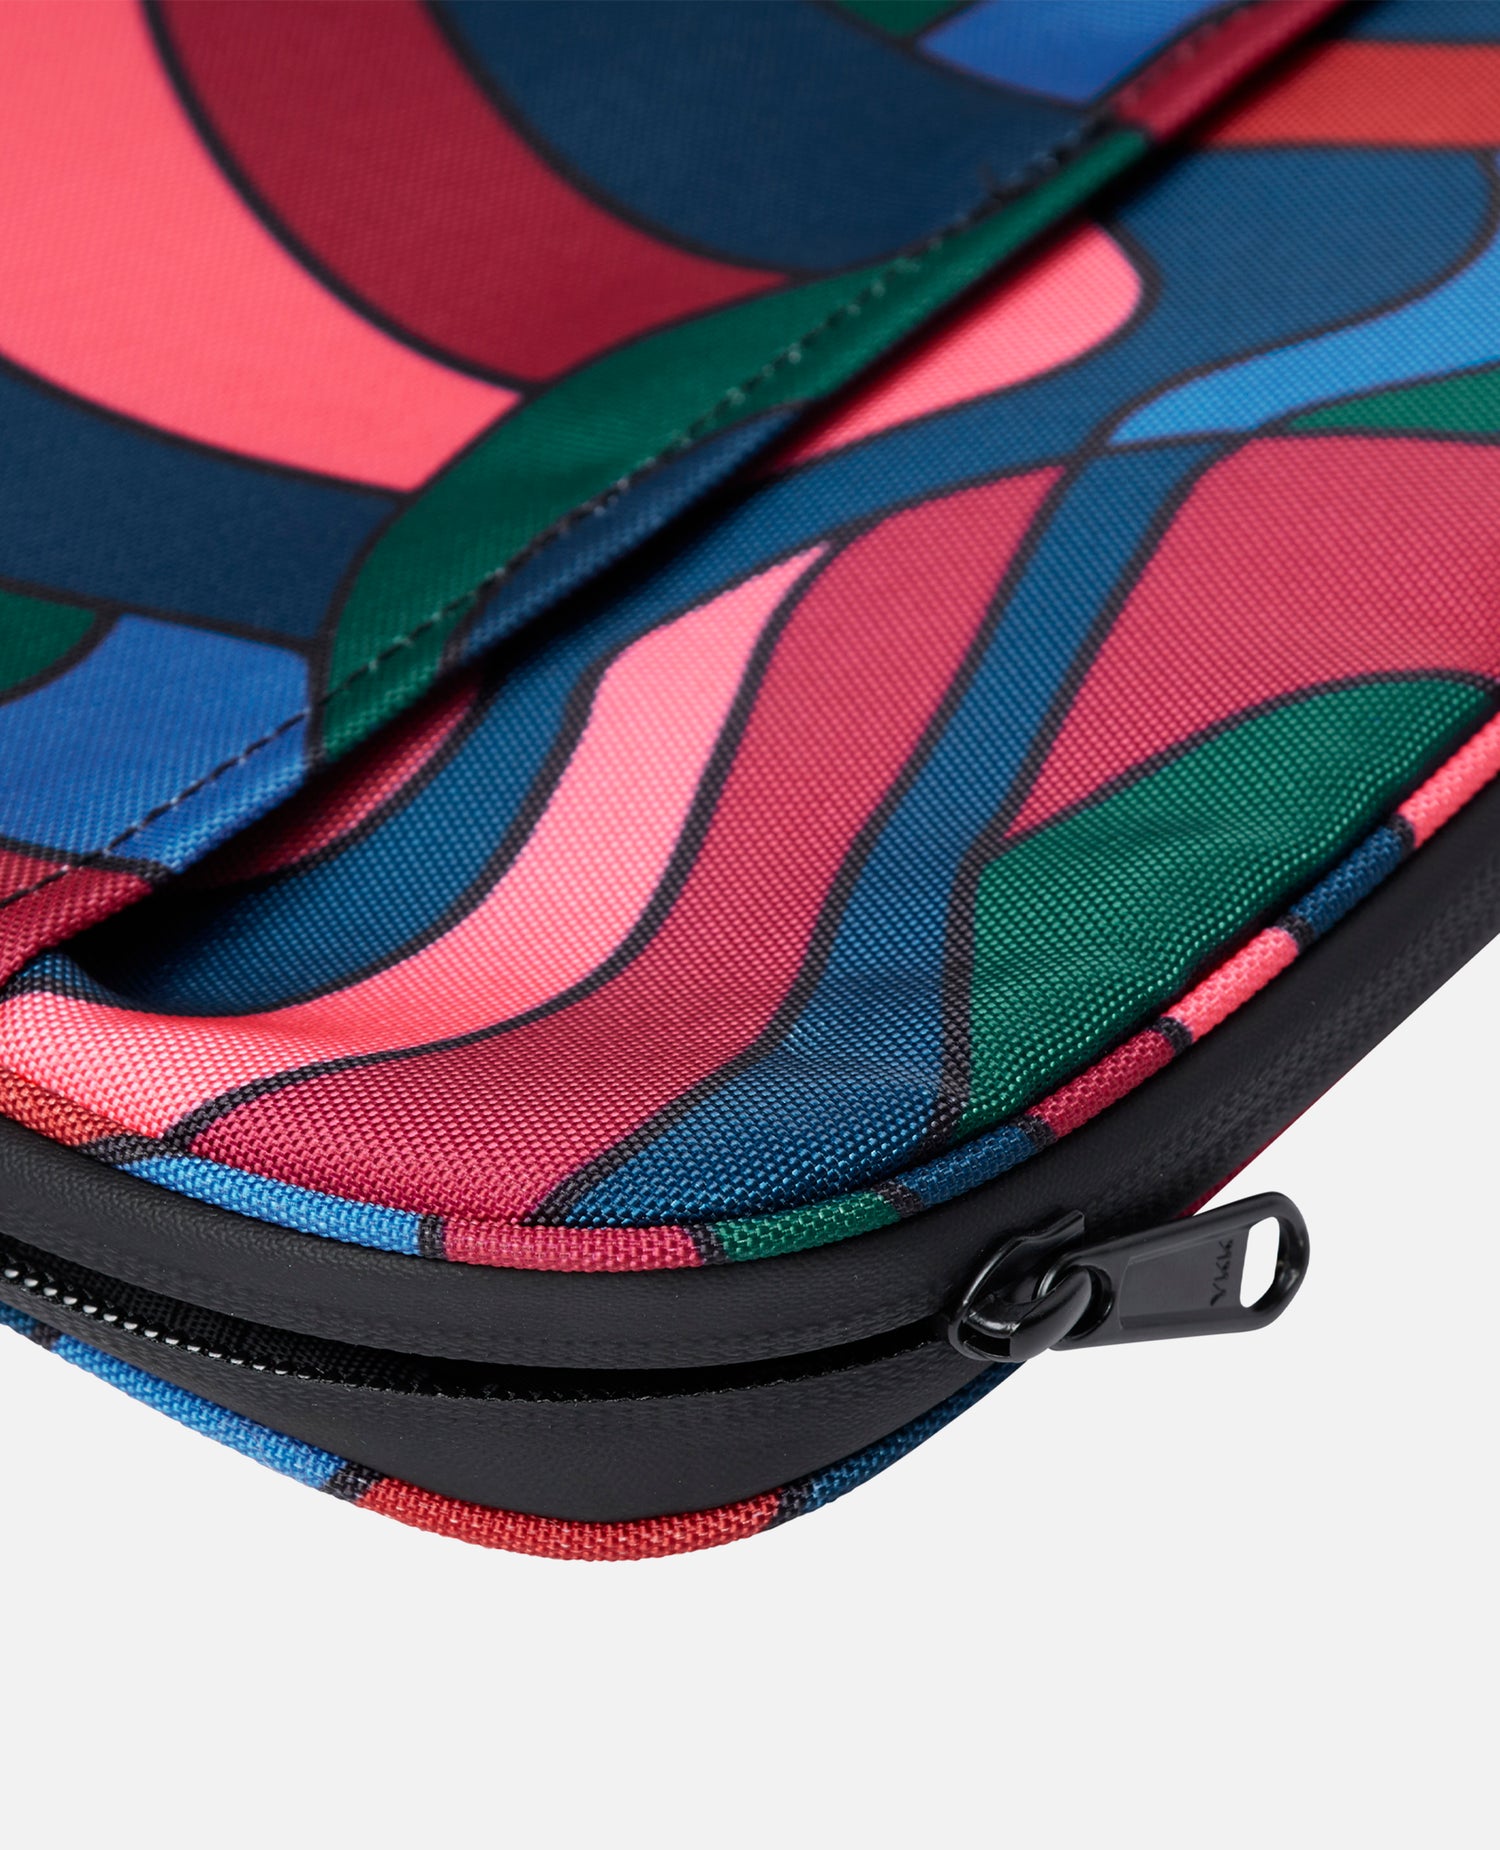 byParra Distorted Waves Laptop Sleeve (14 inch)